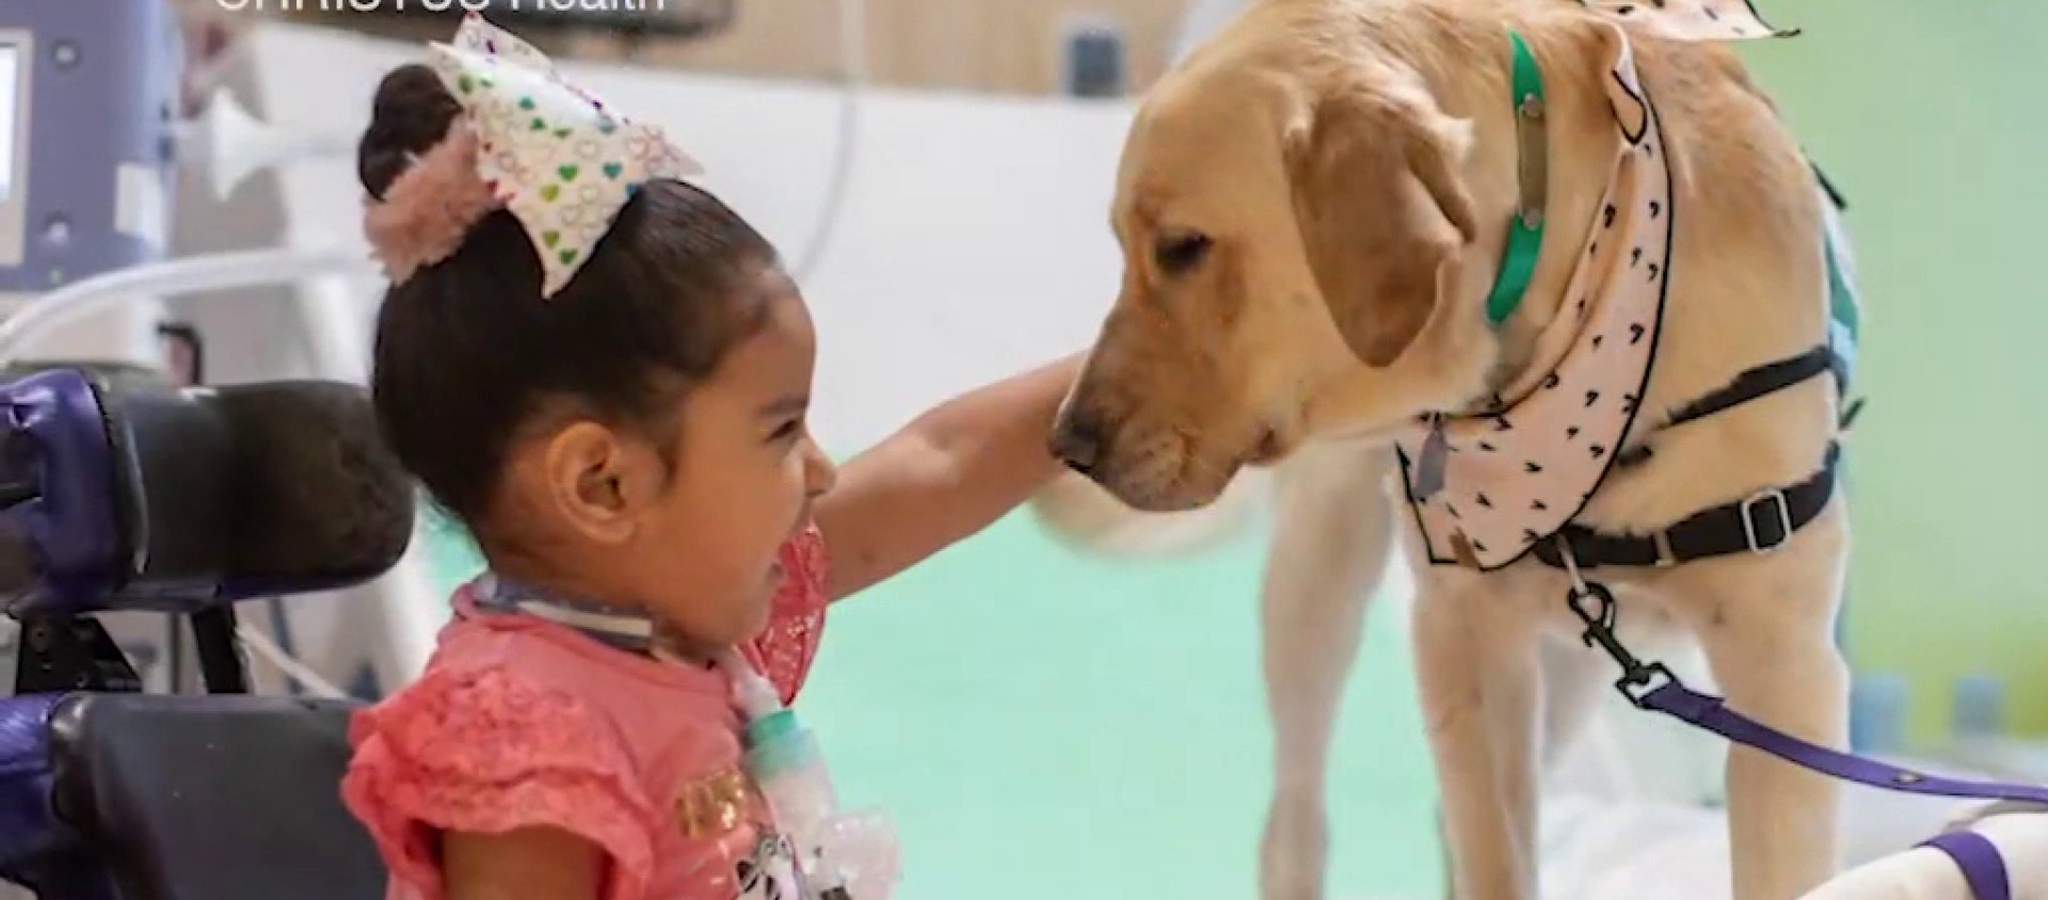 Therapy dog Marcus brings joy amid pandemic to Children’s Hospital of San Antonio